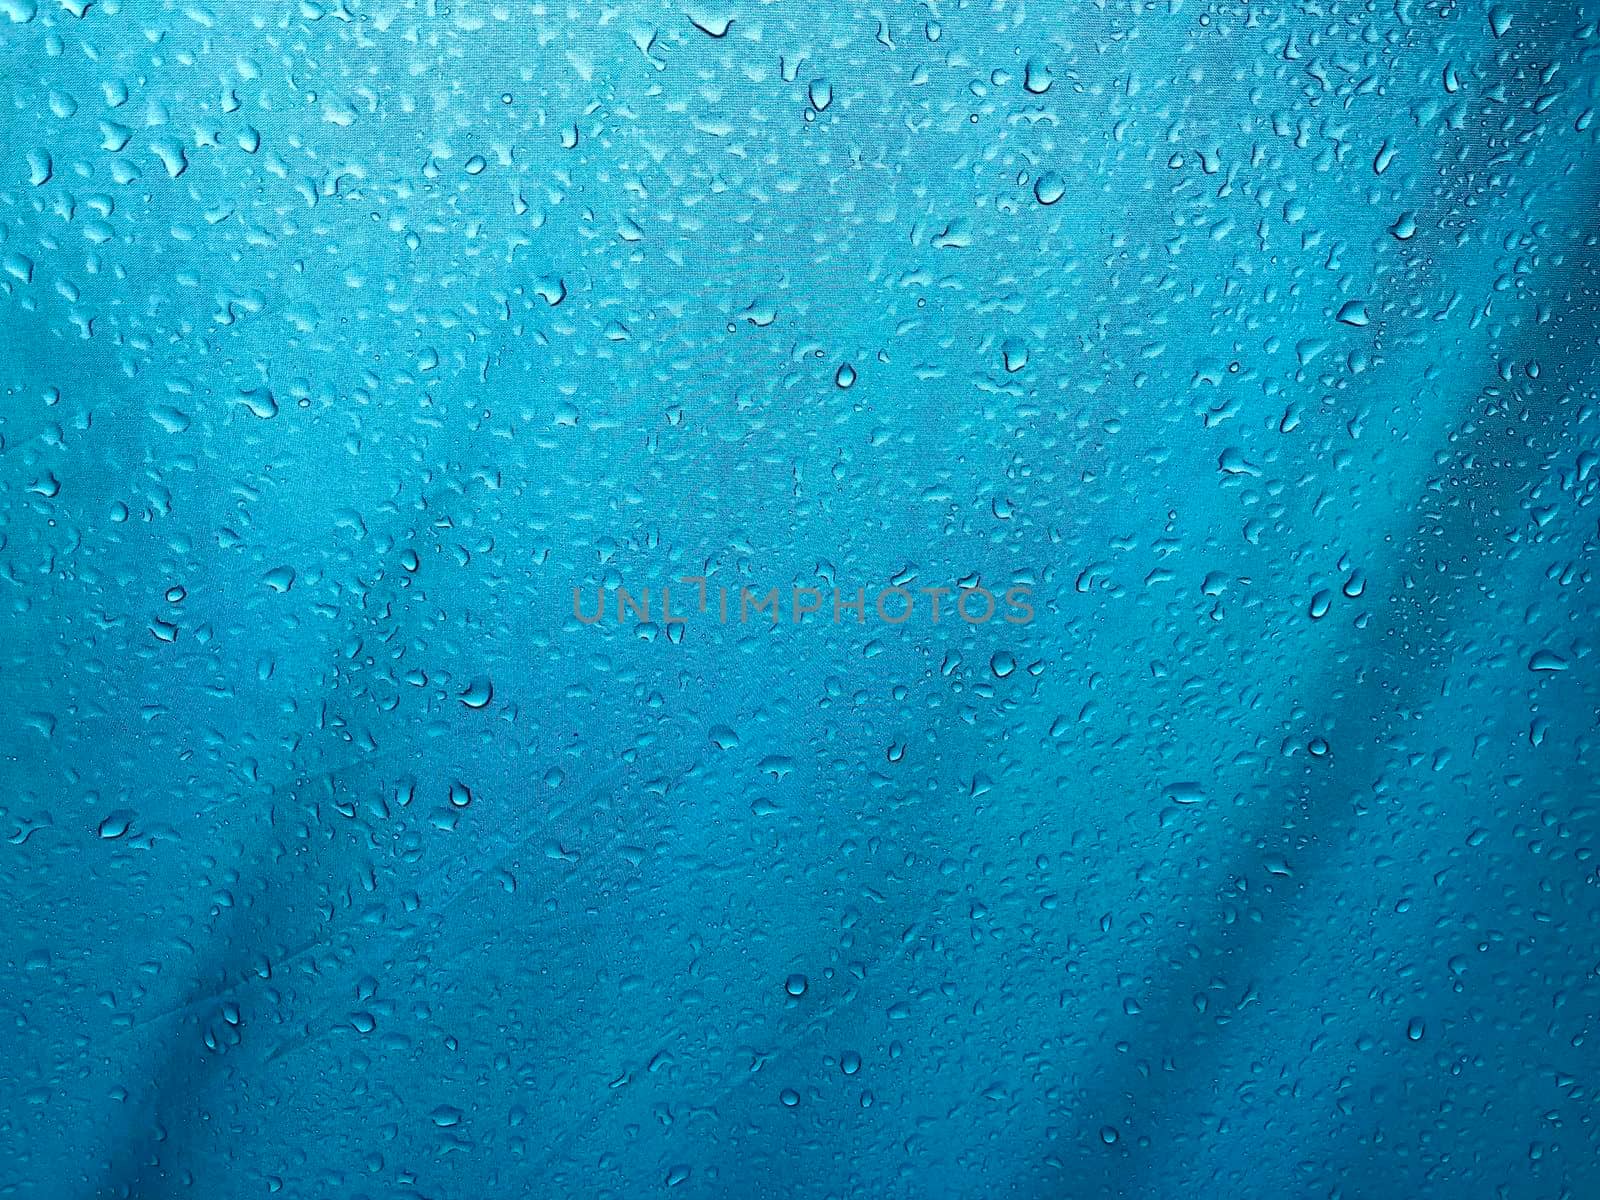 Drops down on the blue canvas floor. Abstract background